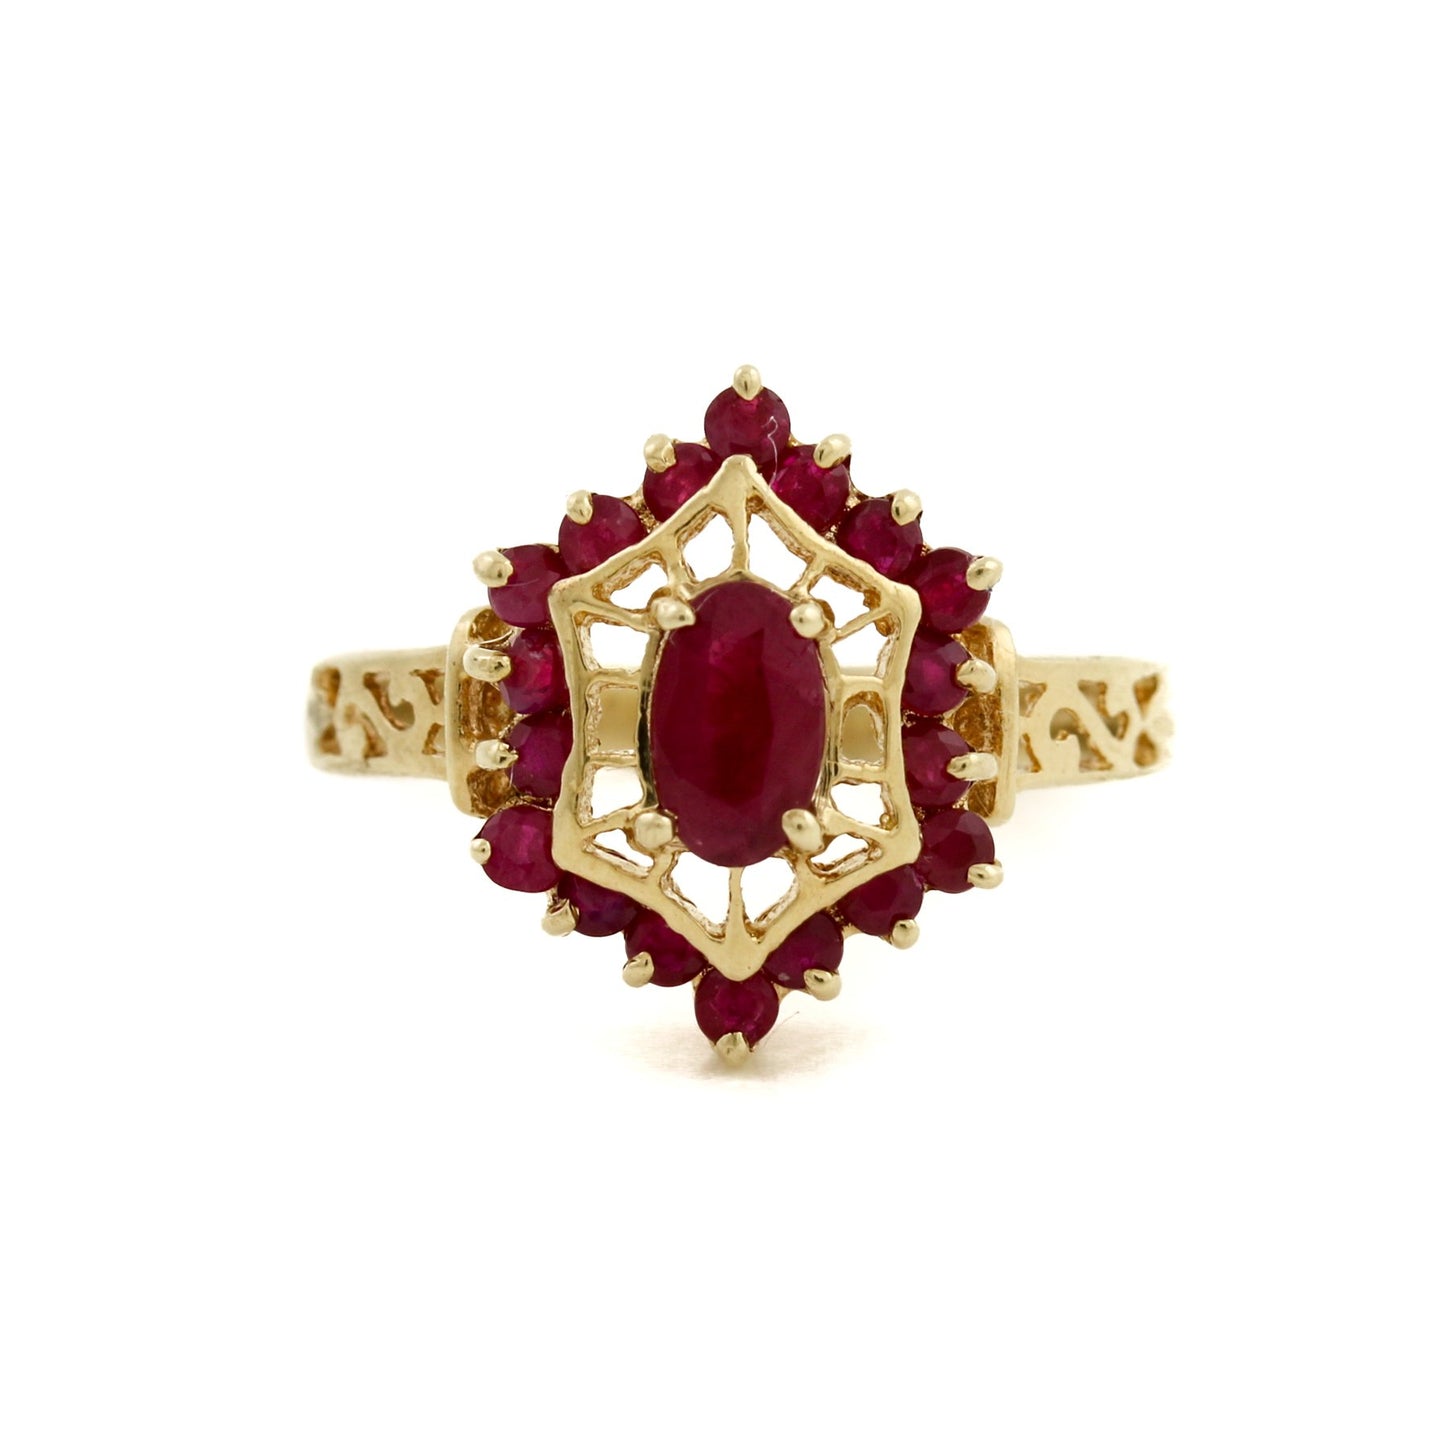 10 KT Gold x Vintage Ruby Cocktail Ring - Kingdom Jewelry